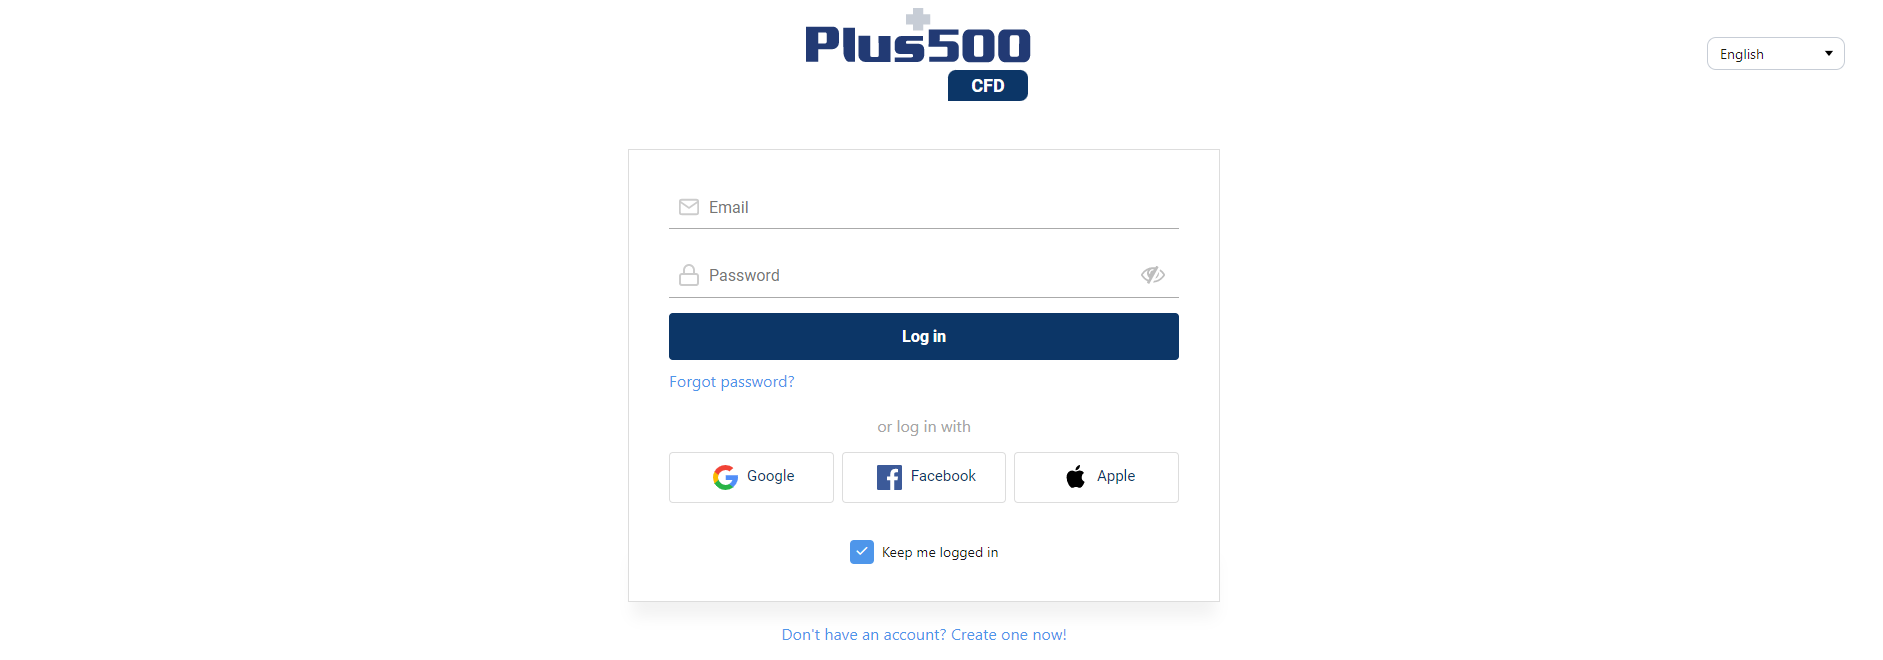 How to open a Plus500 demo account?